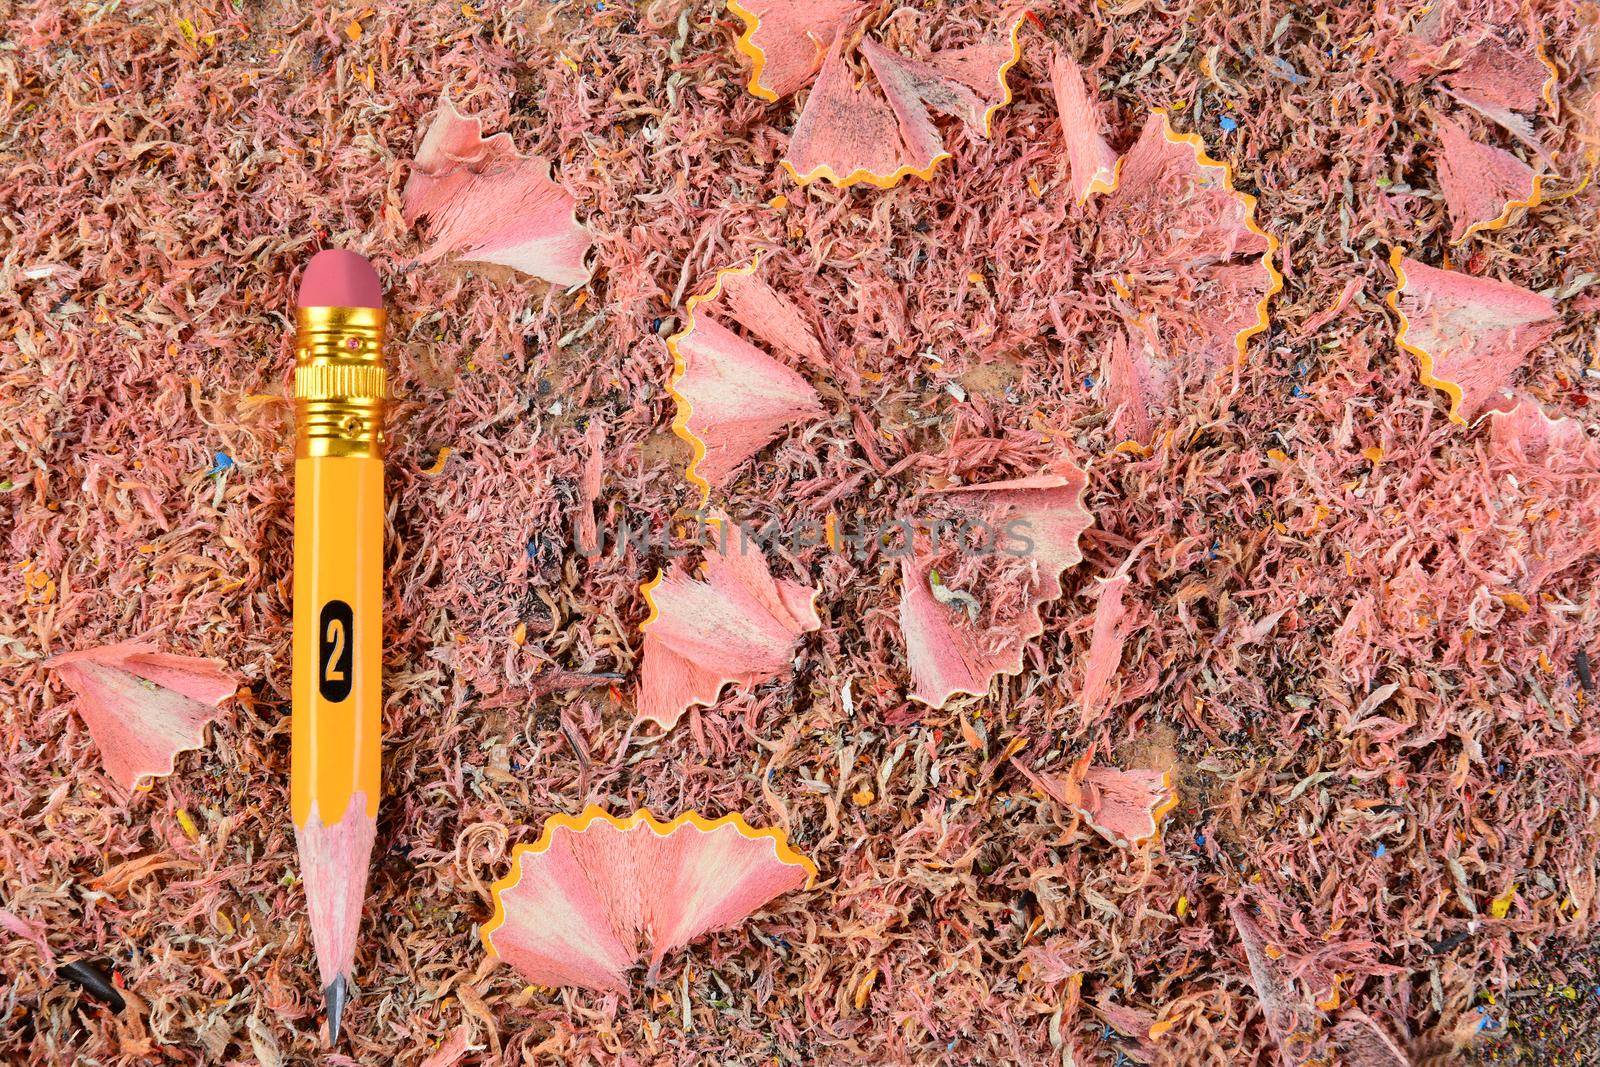 Overhead closeup of a sharpened pencil stub on a background of shavings. The well used #2 pencil is set ot the left side of the frame. 